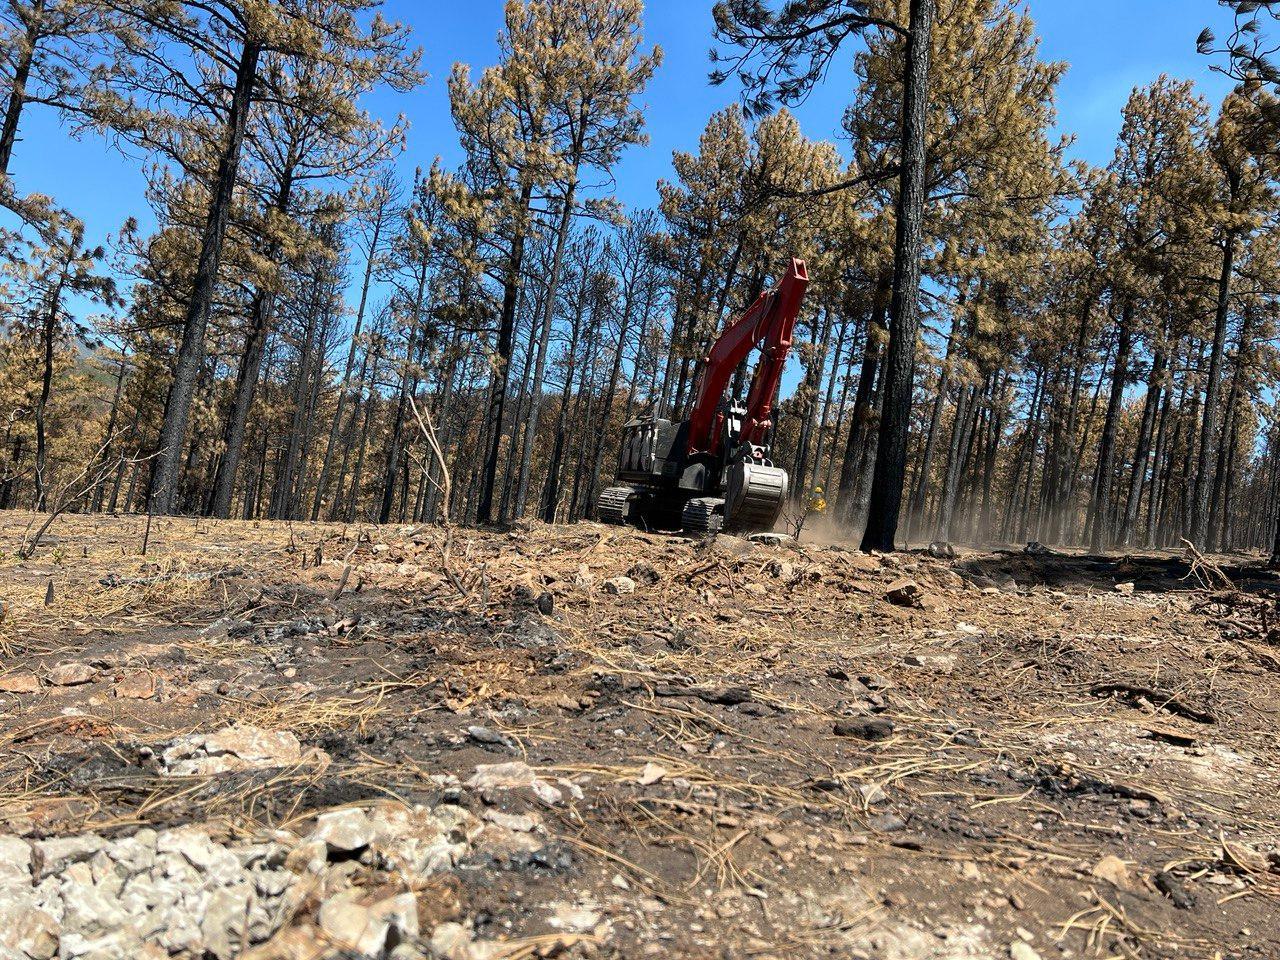 Rocky, dirt covered ground with red, heavy equipment called an excavator working in the background.  Burned, black trees with brown pine needles fill the background against a blue sky.